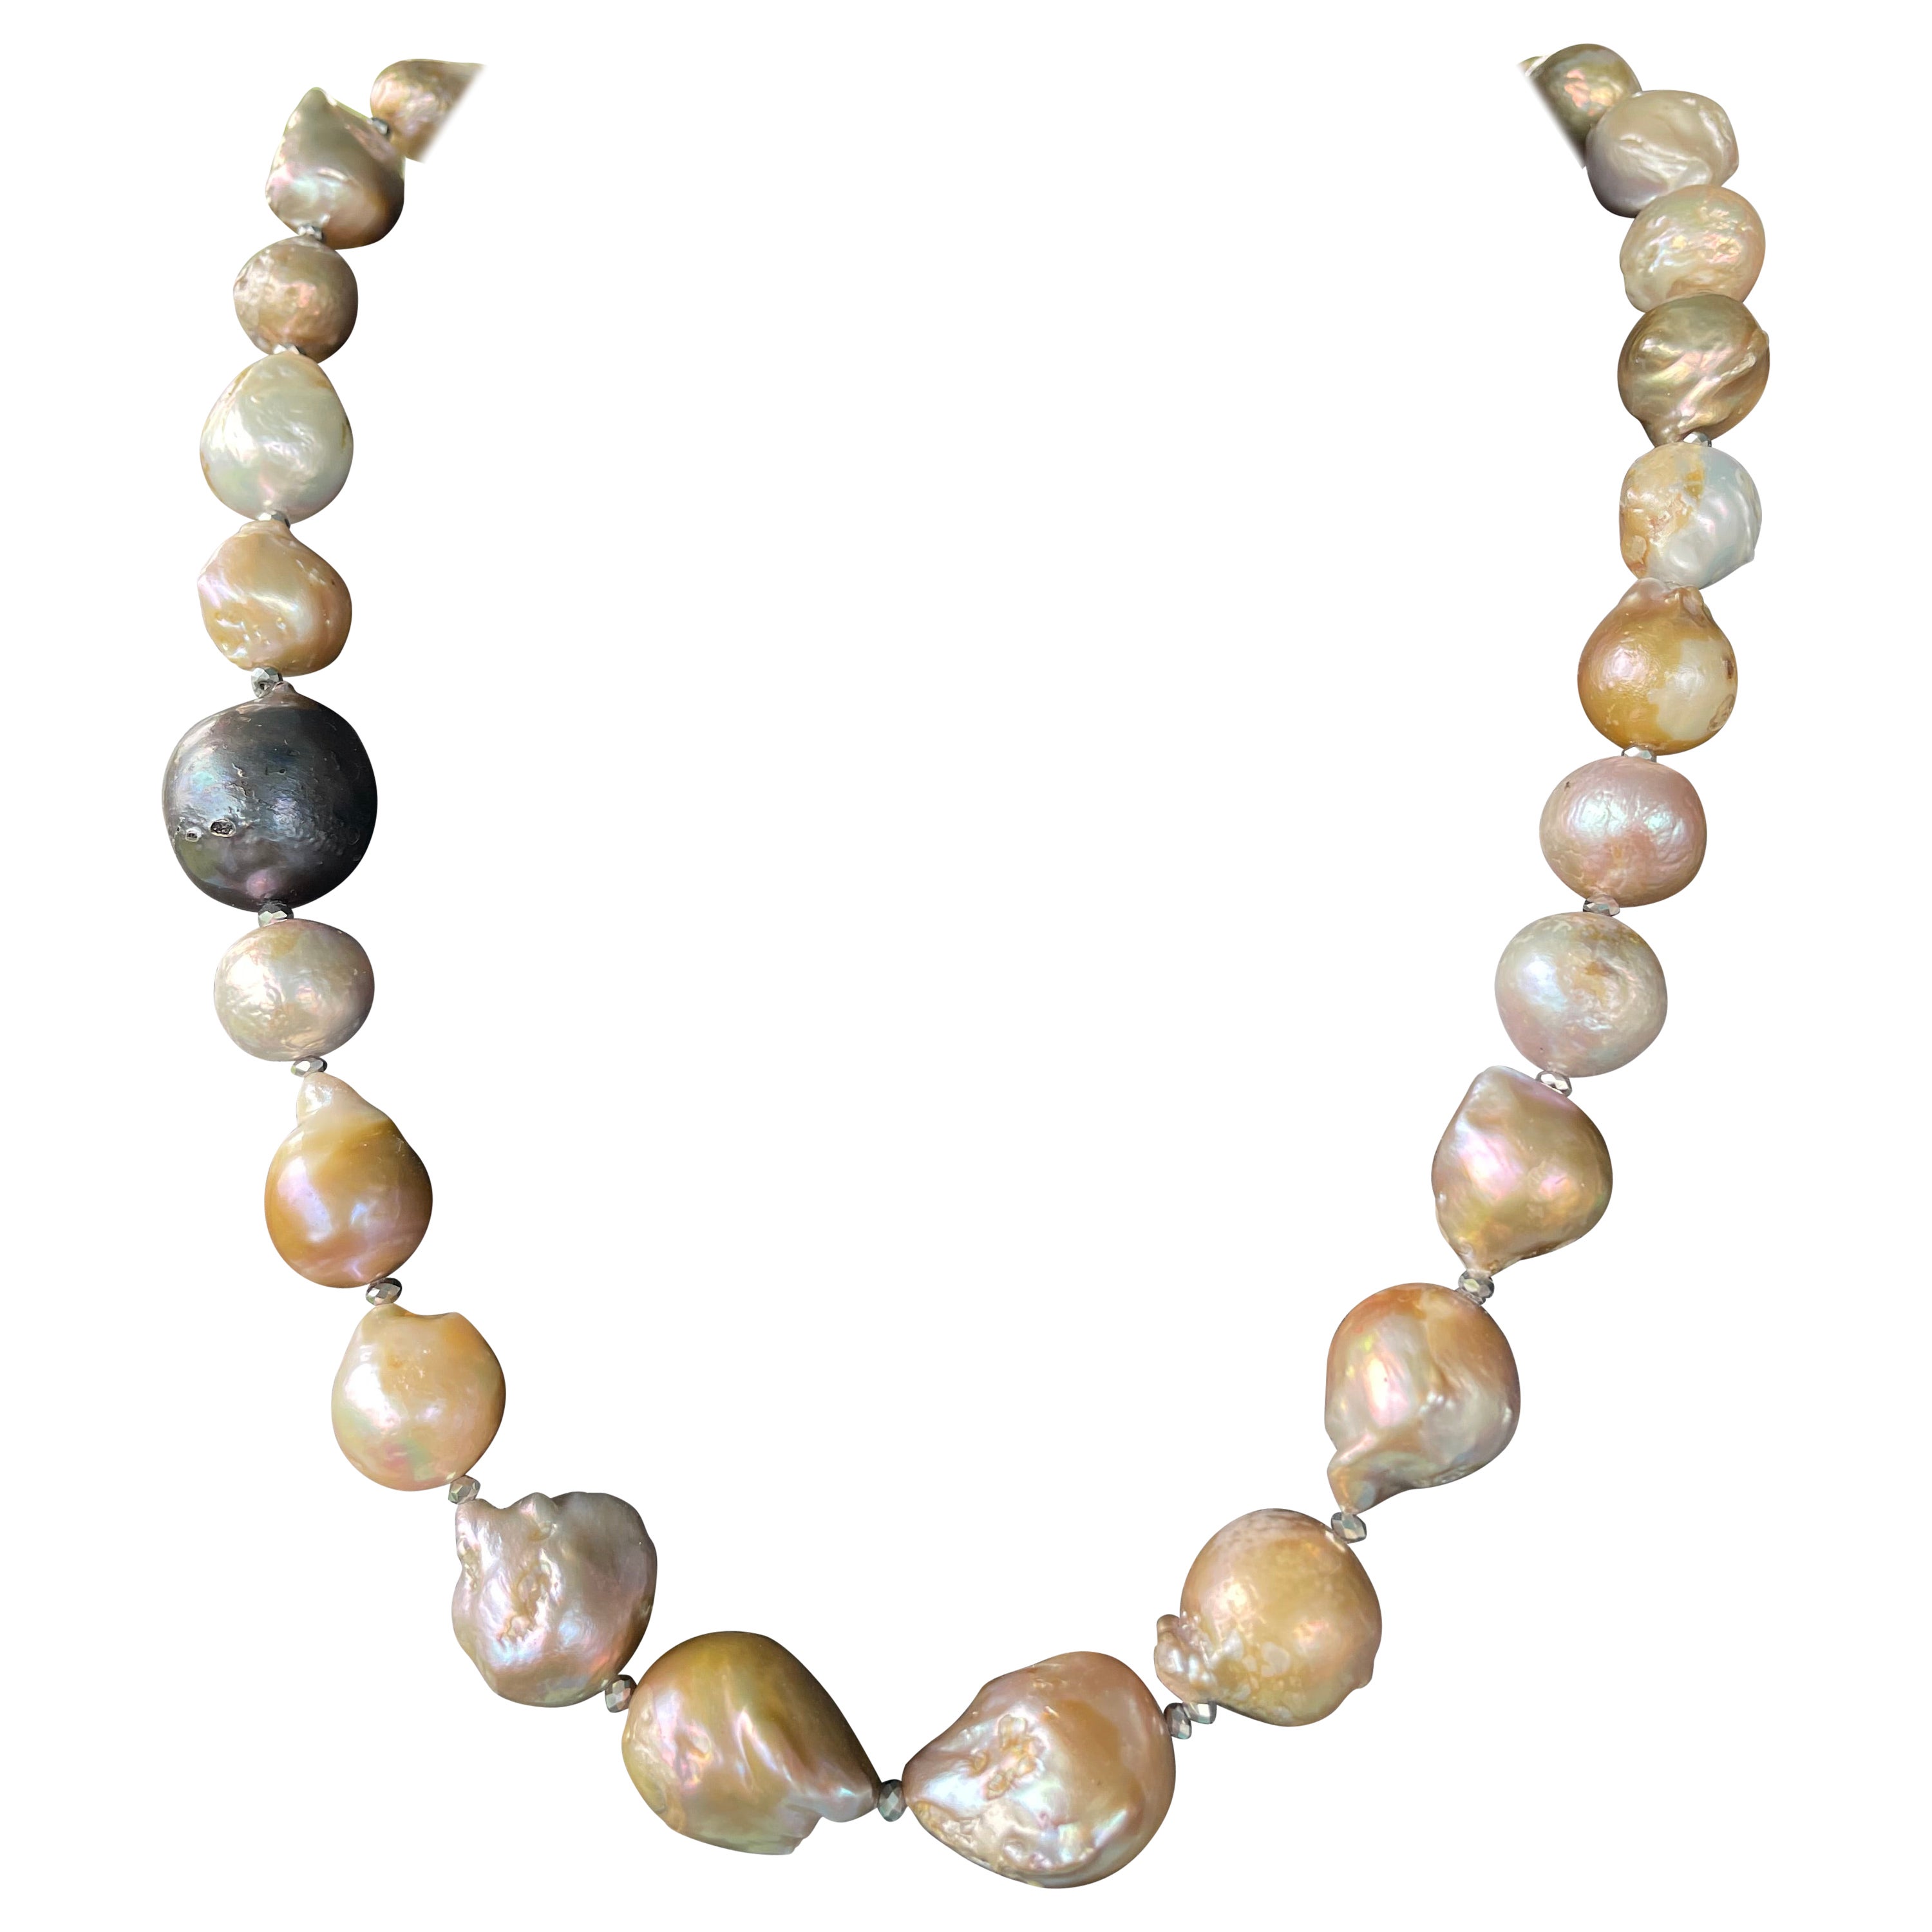 LB offers Large Pastel Baroque Pearls with Pyrite spacers necklace For Sale